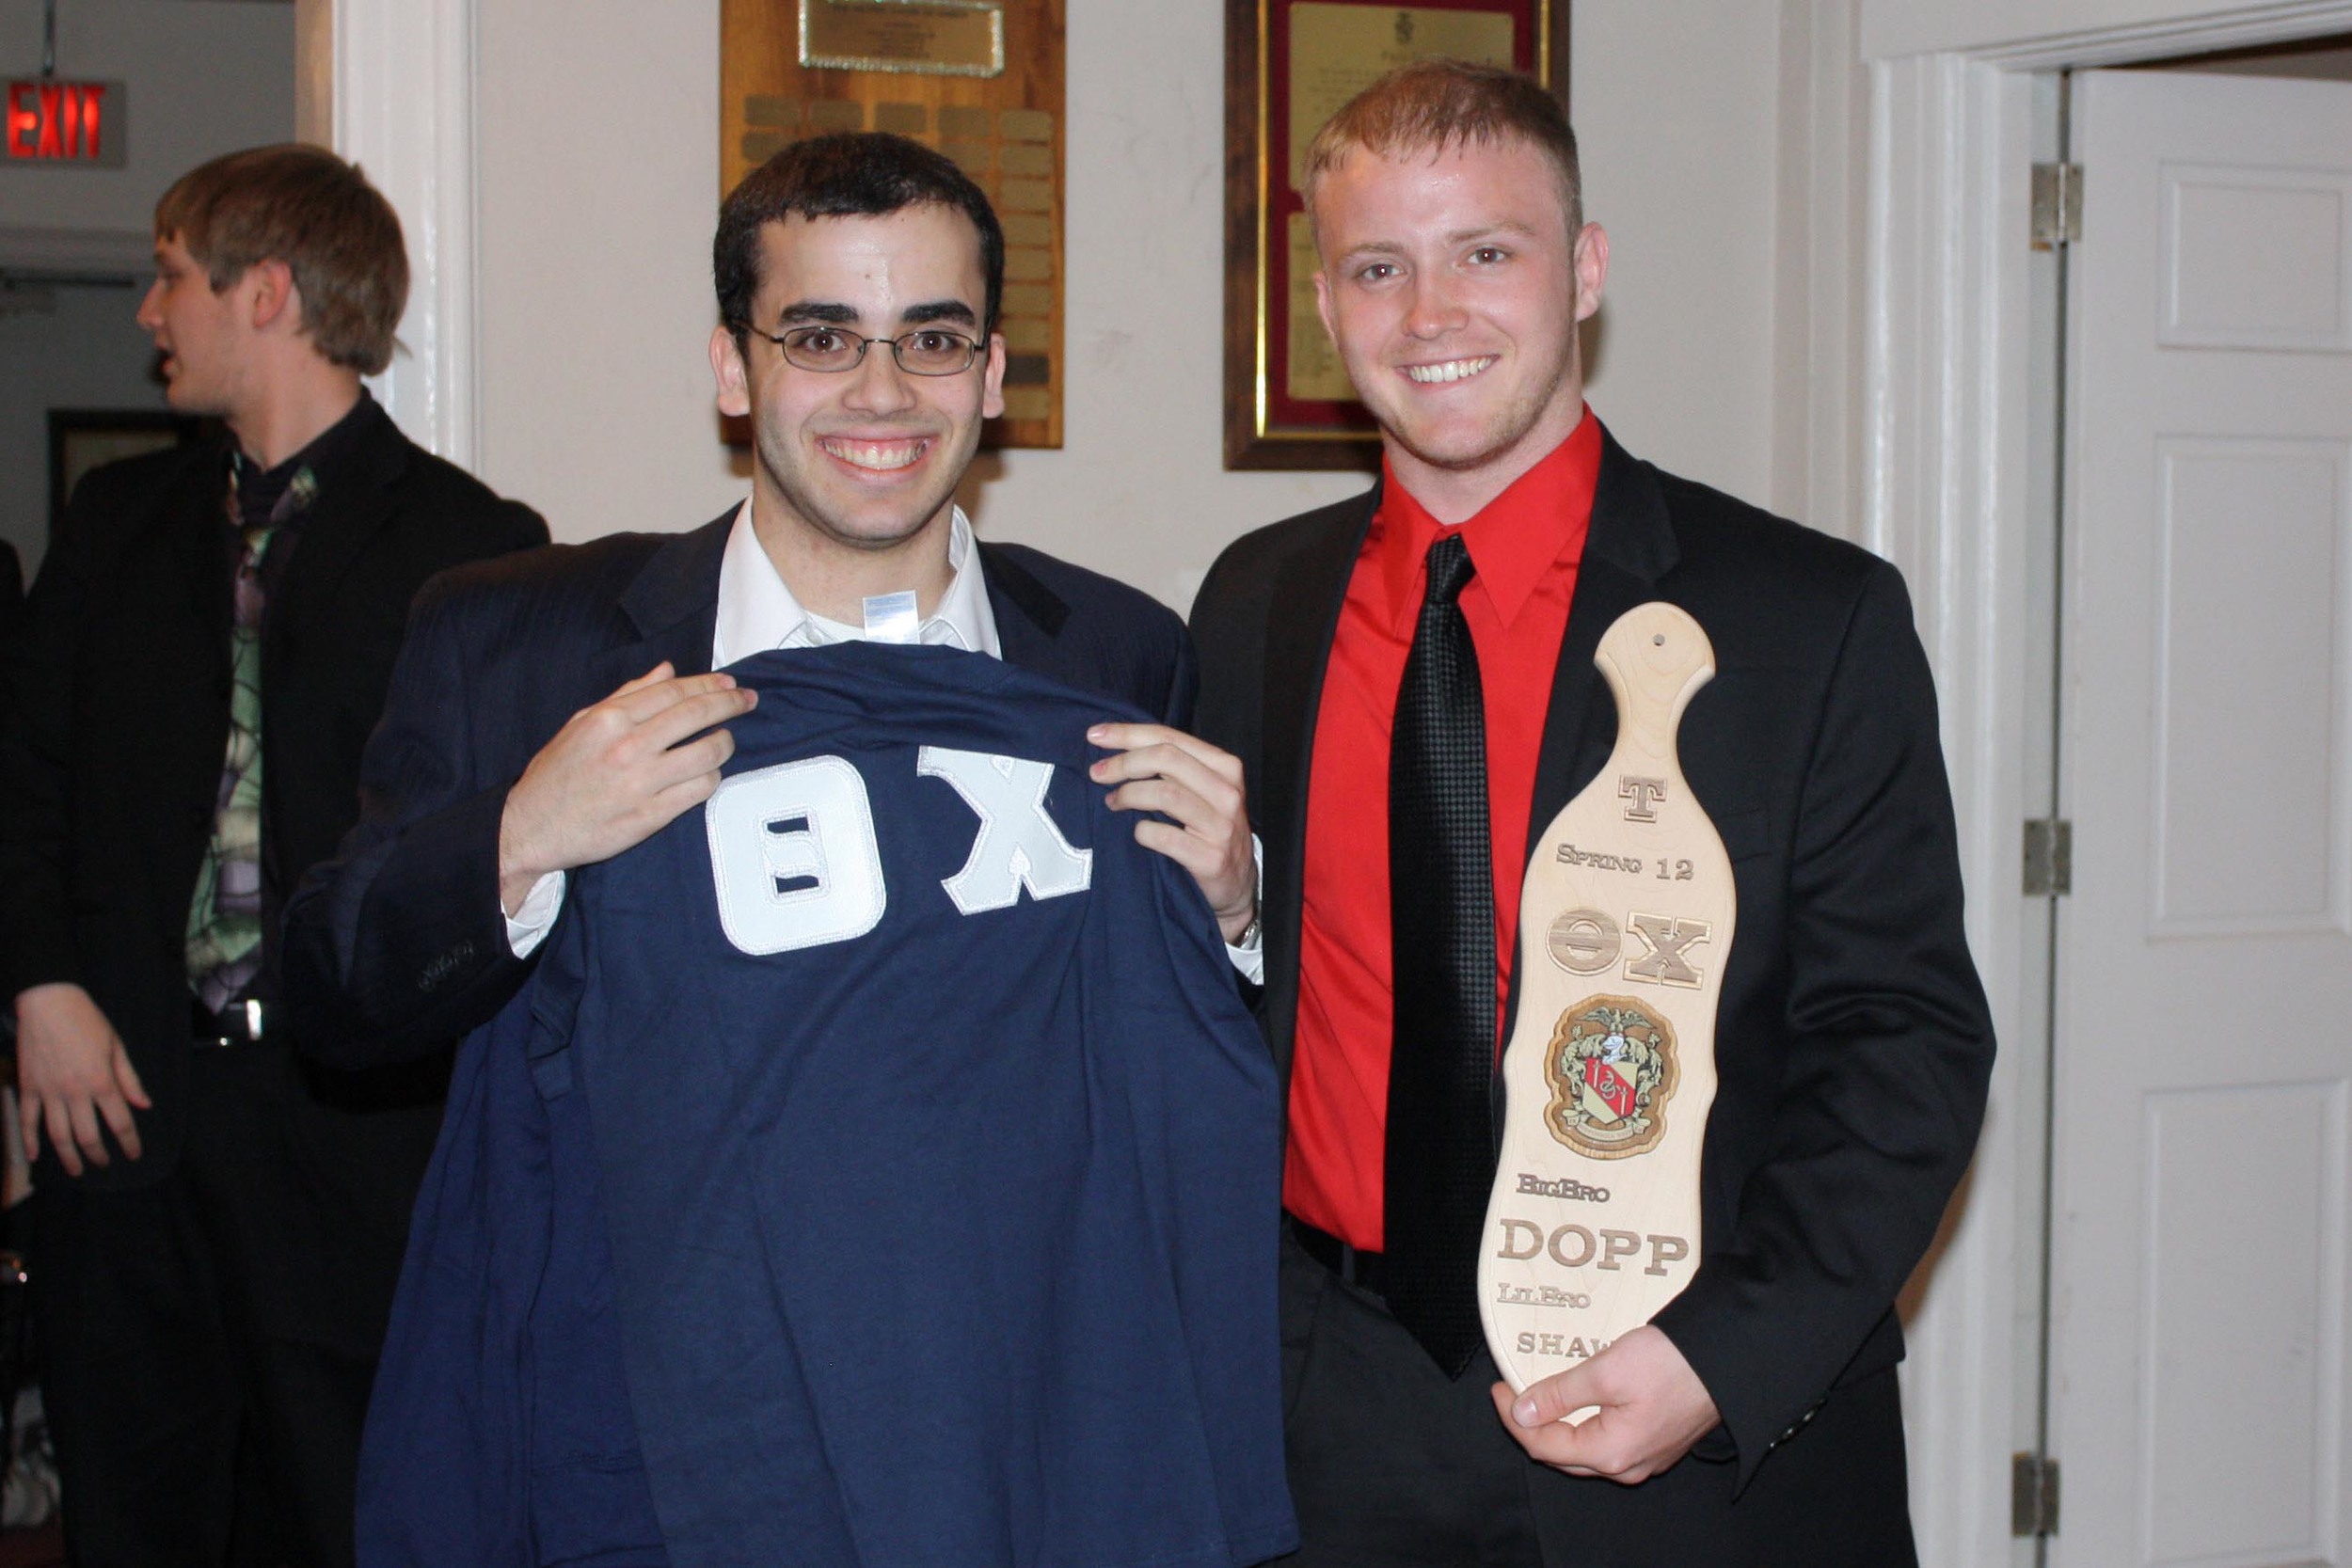  Little Brother Shawn Stern (L) and Big Brother Tyler Doppelheuer
Spring 2012 Initiation Night 